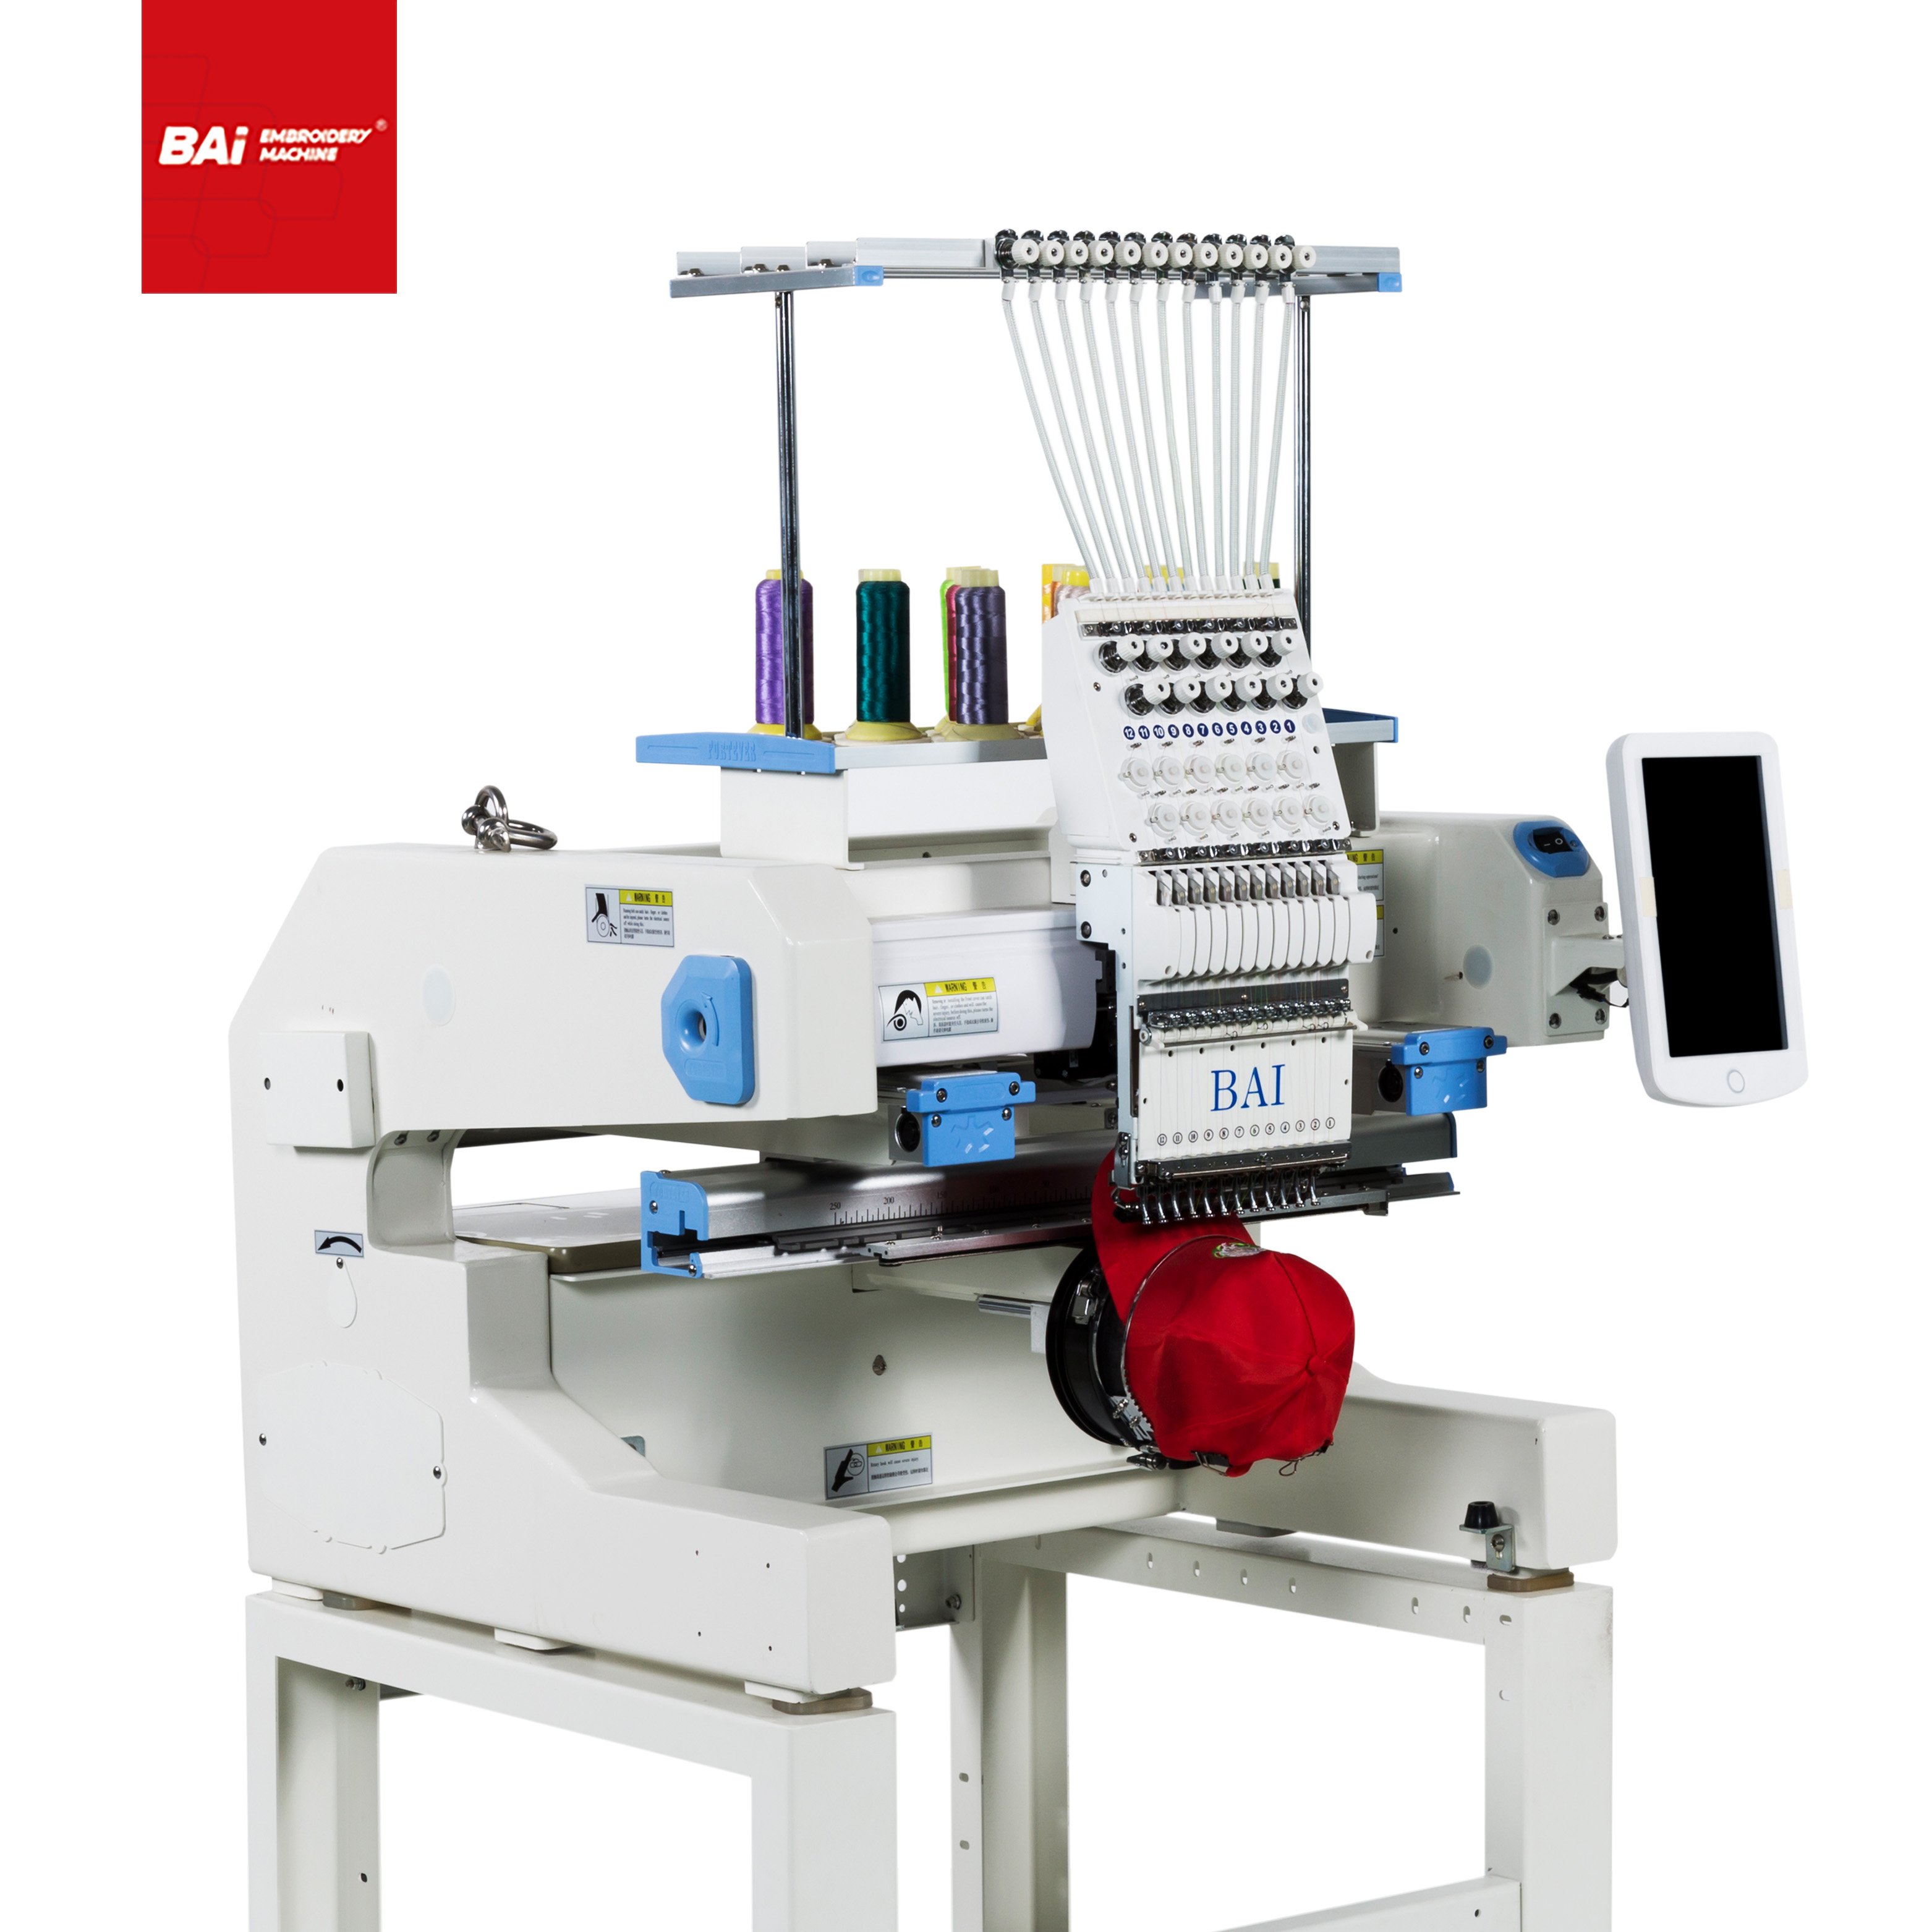 BAI Mulit Embroidery Machine for Cap/tshirt with Garment